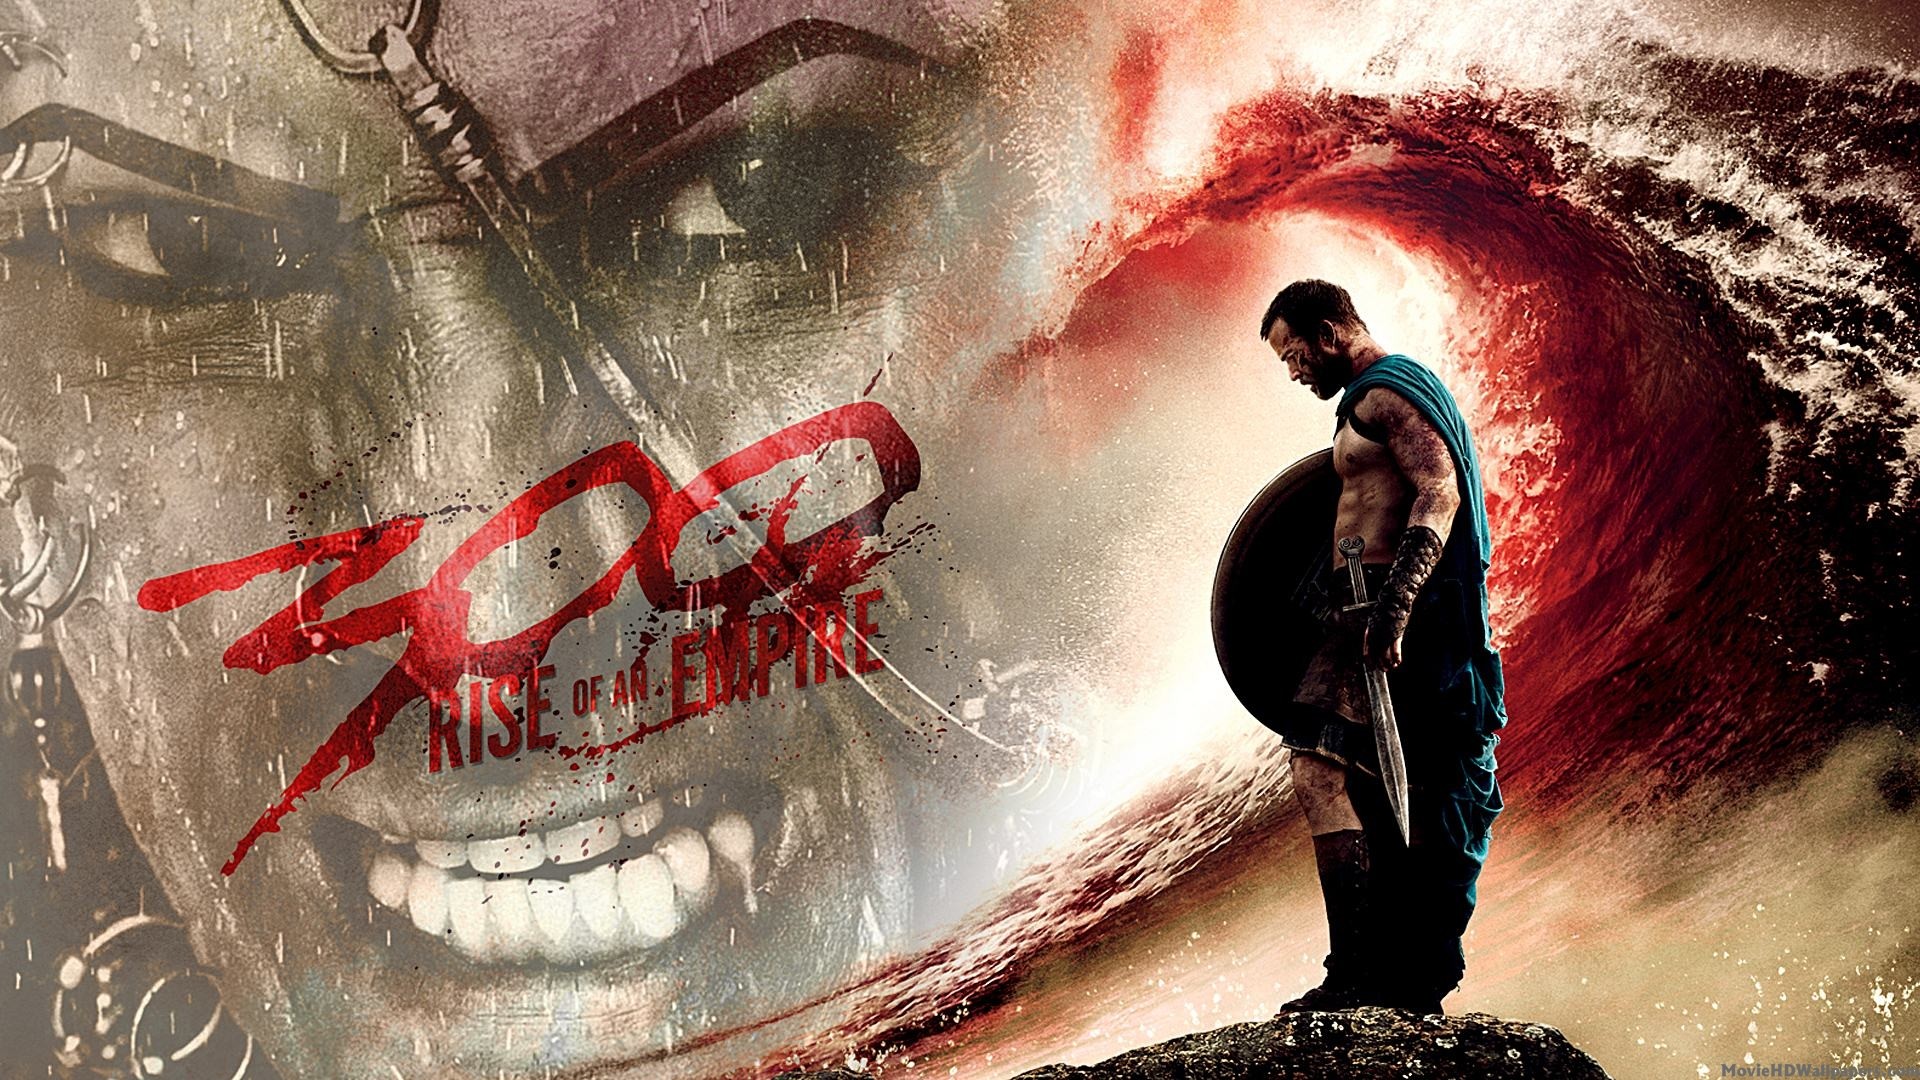 1920x1080 300 Rise of an Empire HD Wallpapers